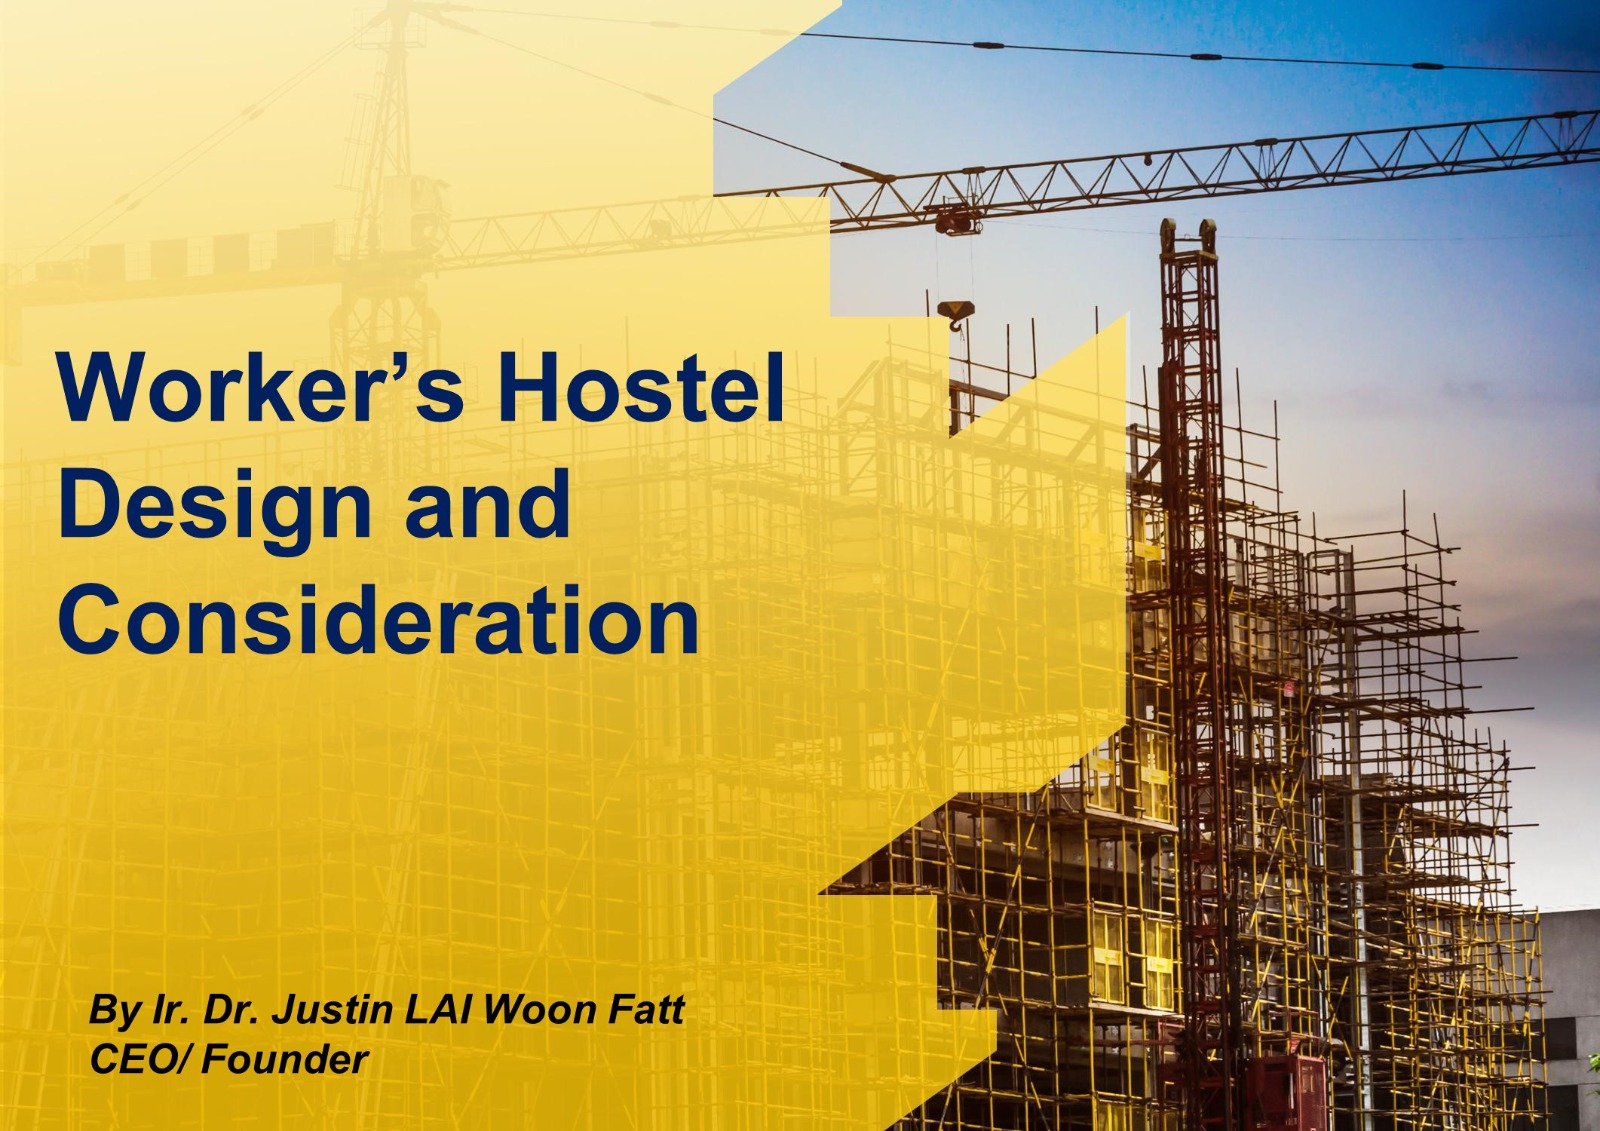 Worker’s Hostel Design and Consideration